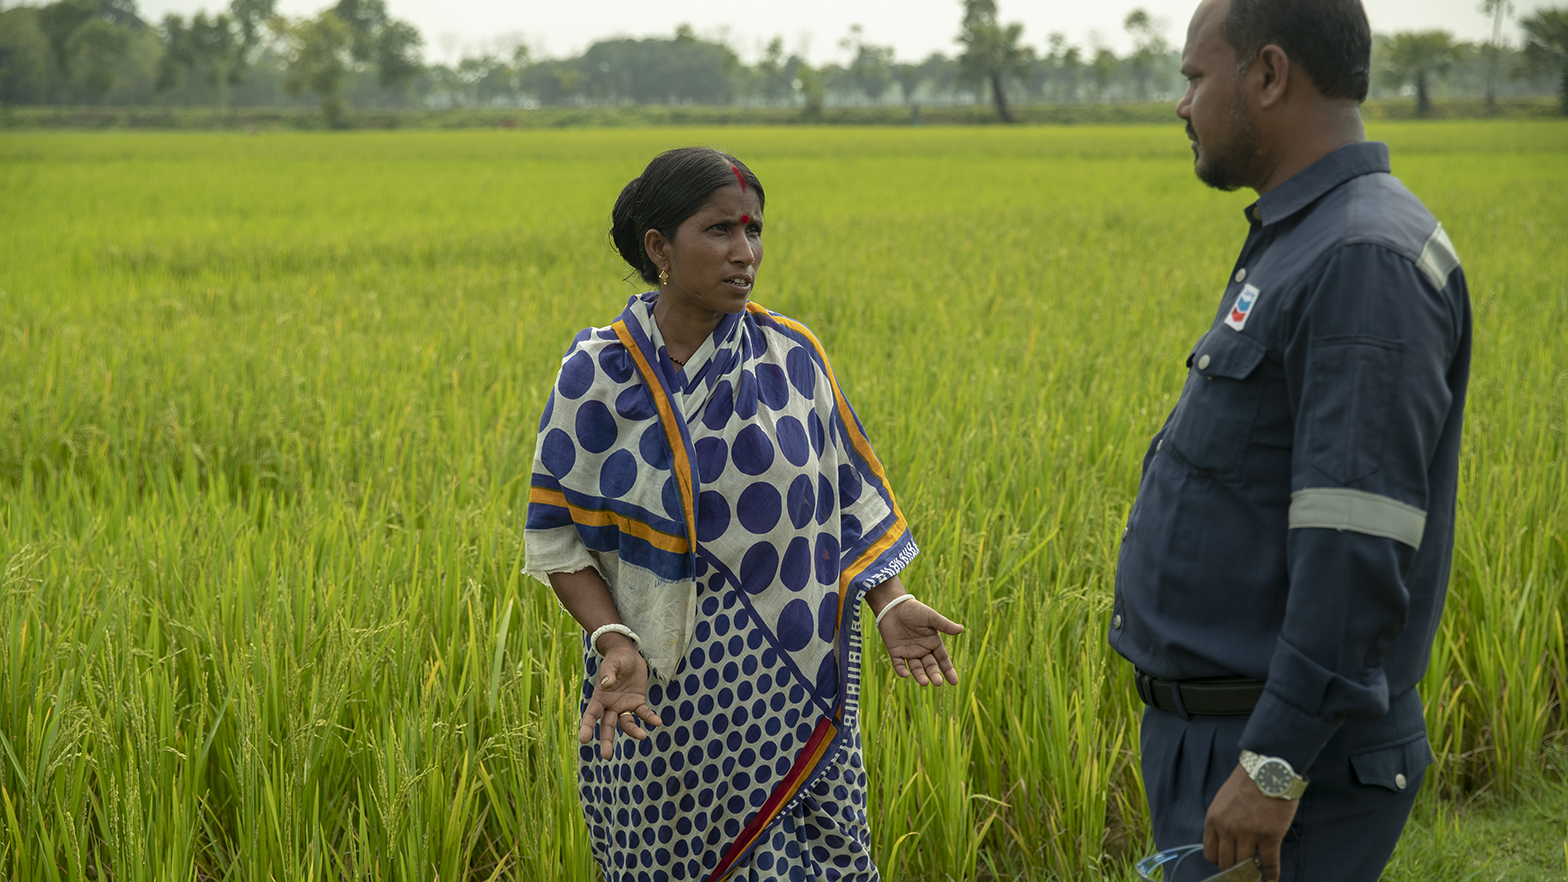 We support Bangladeshi farmers through an initiative to help them diversify and grow their income